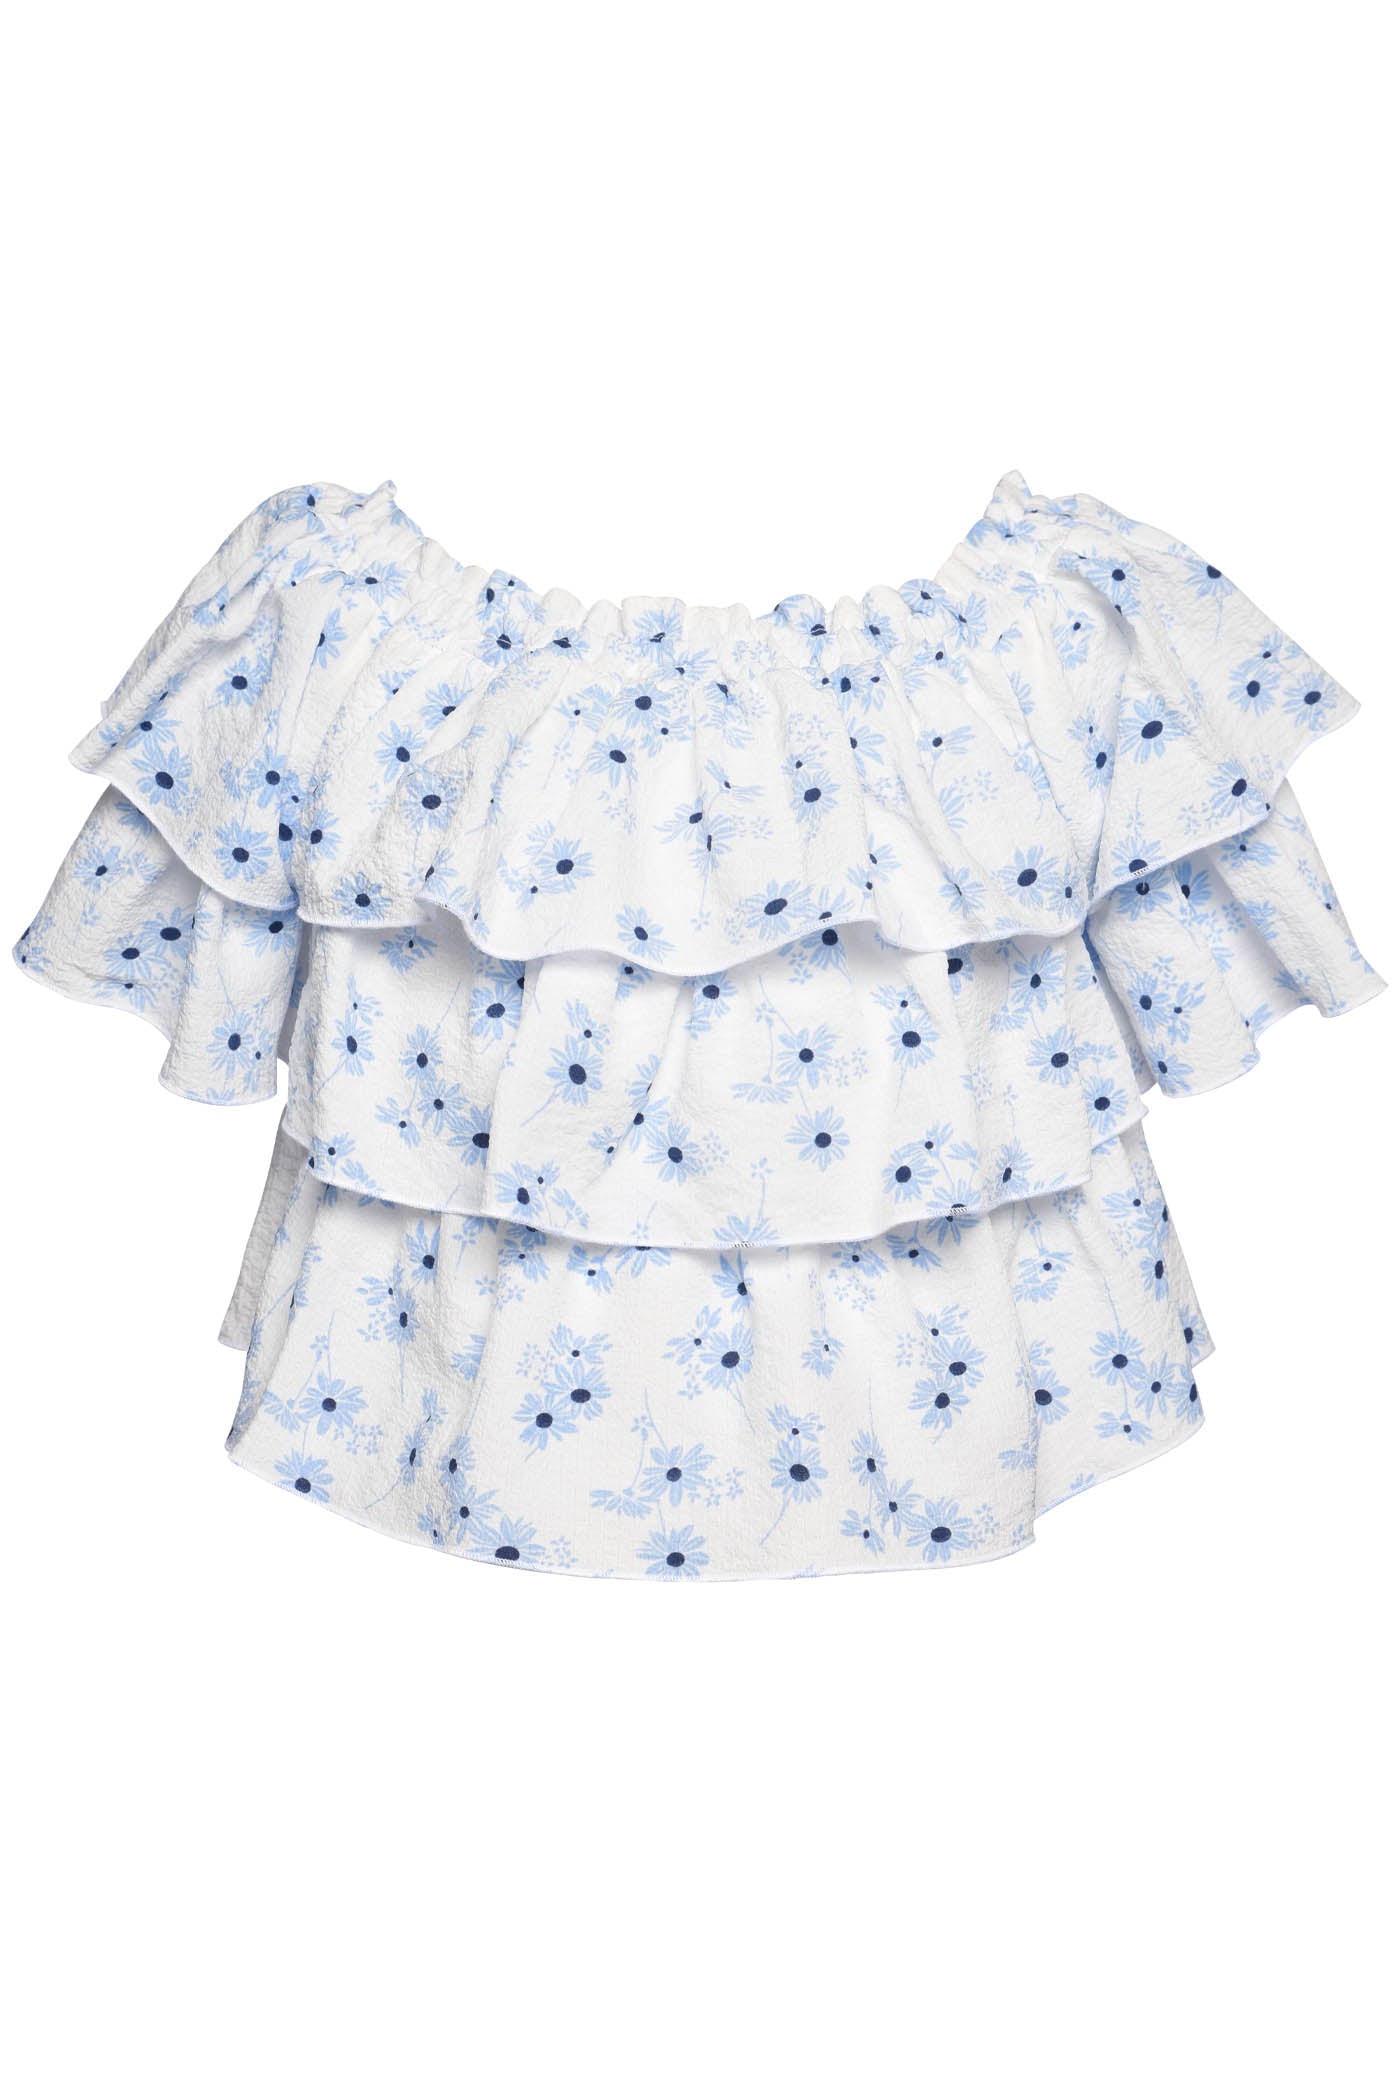 Floral Printed Tiered Top, White with Blue Flowers